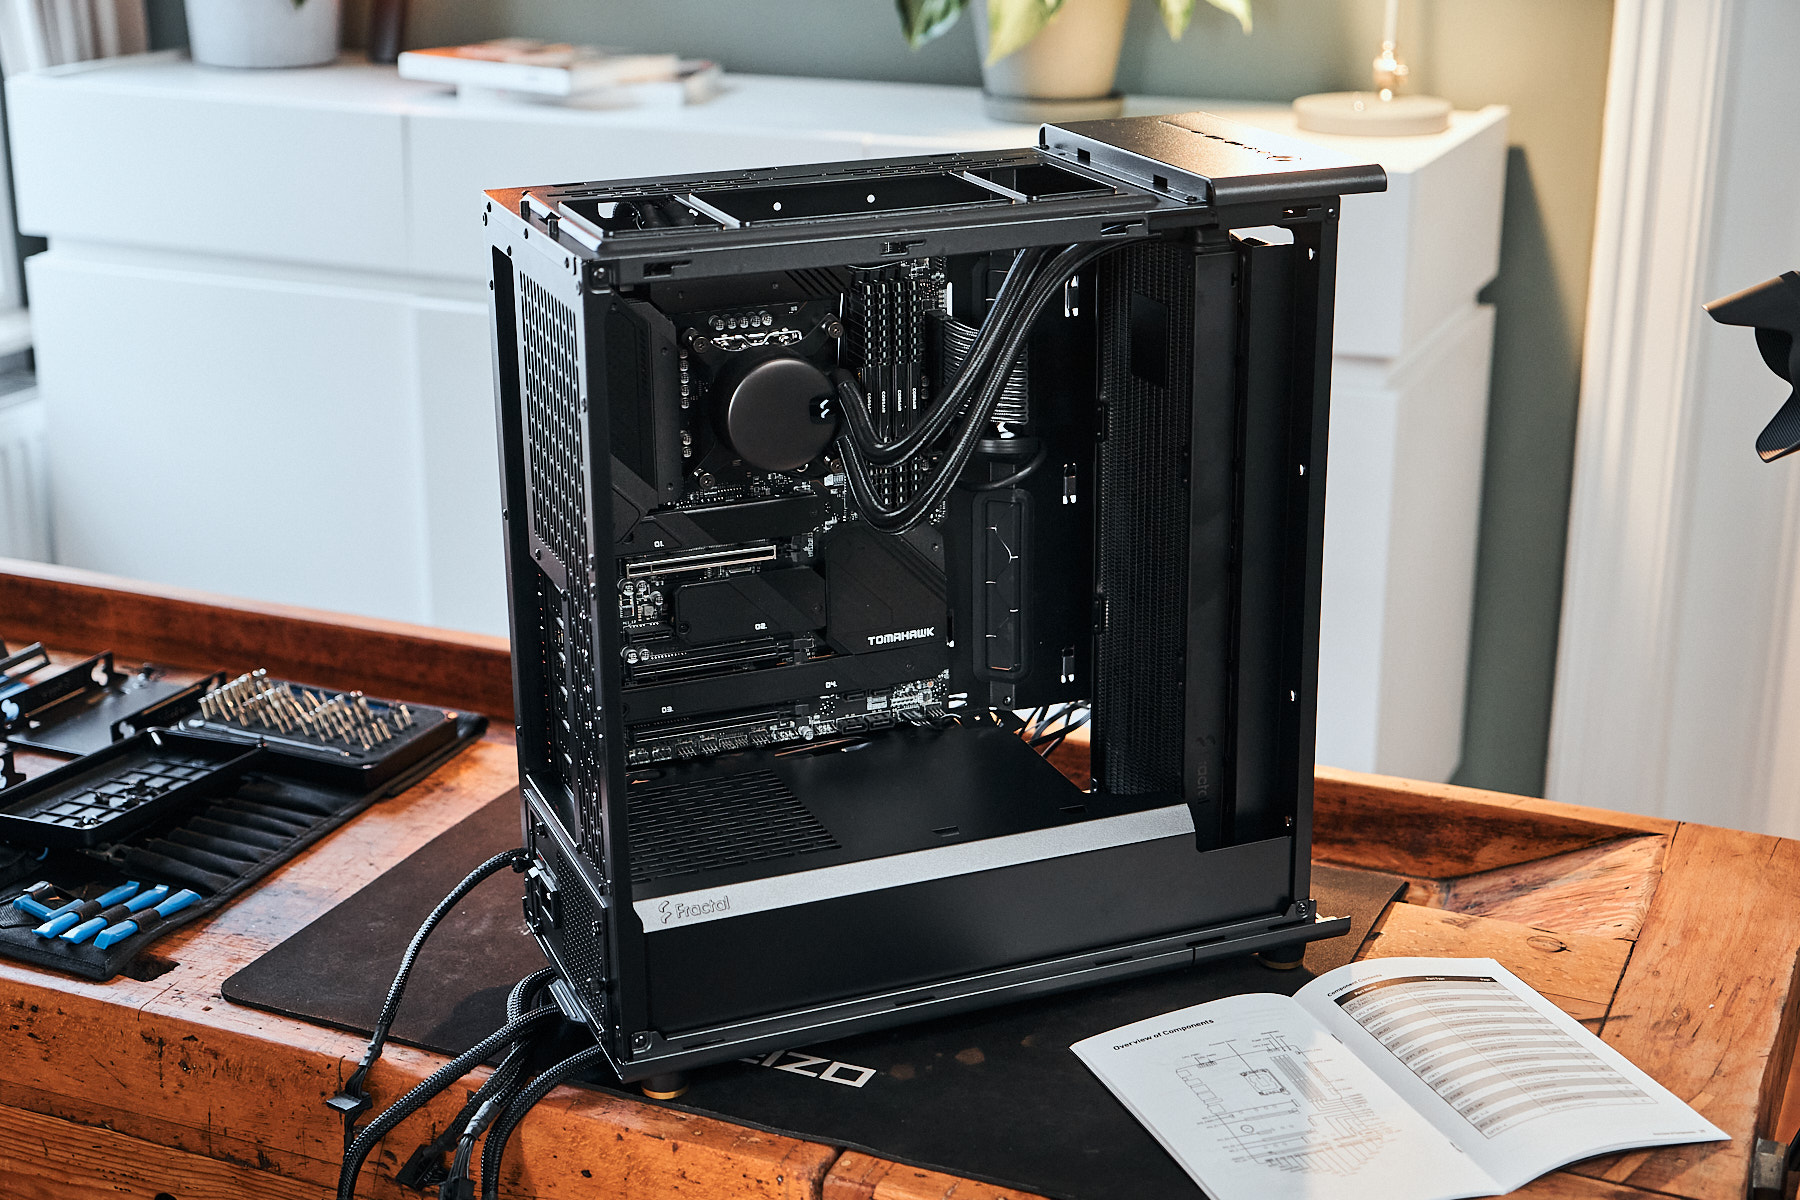 Fractal Design North hands-on: The PC case with Wife Approval